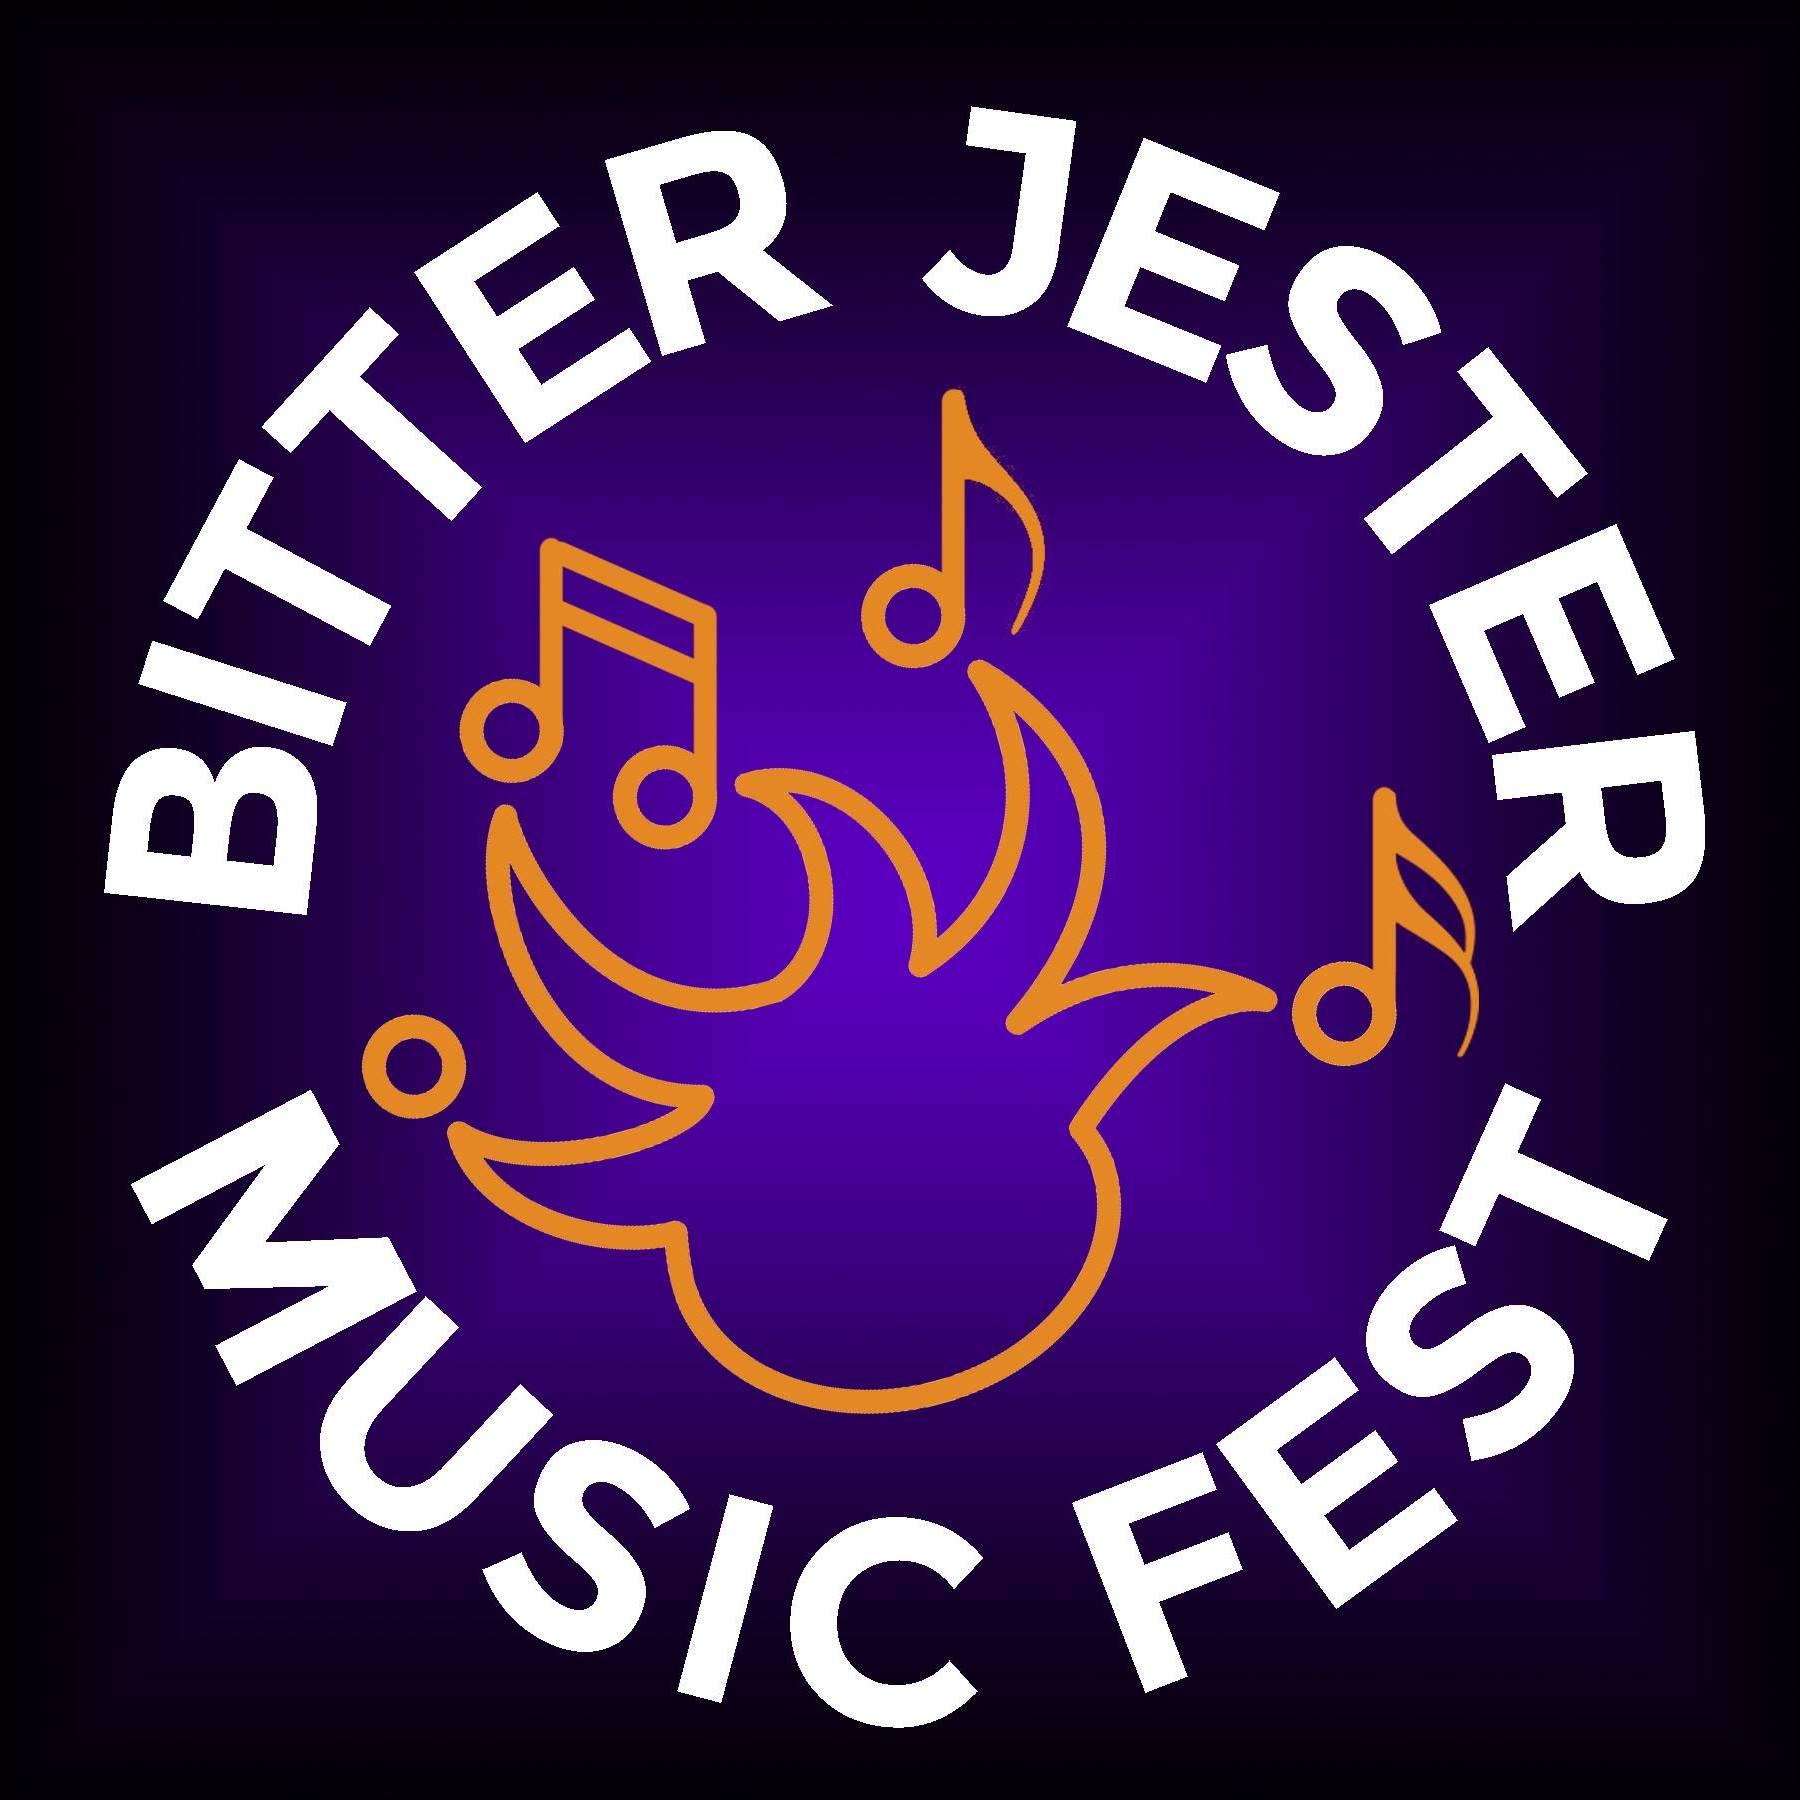 Bitter Jester Music Festival Festival Lineup, Dates and Location